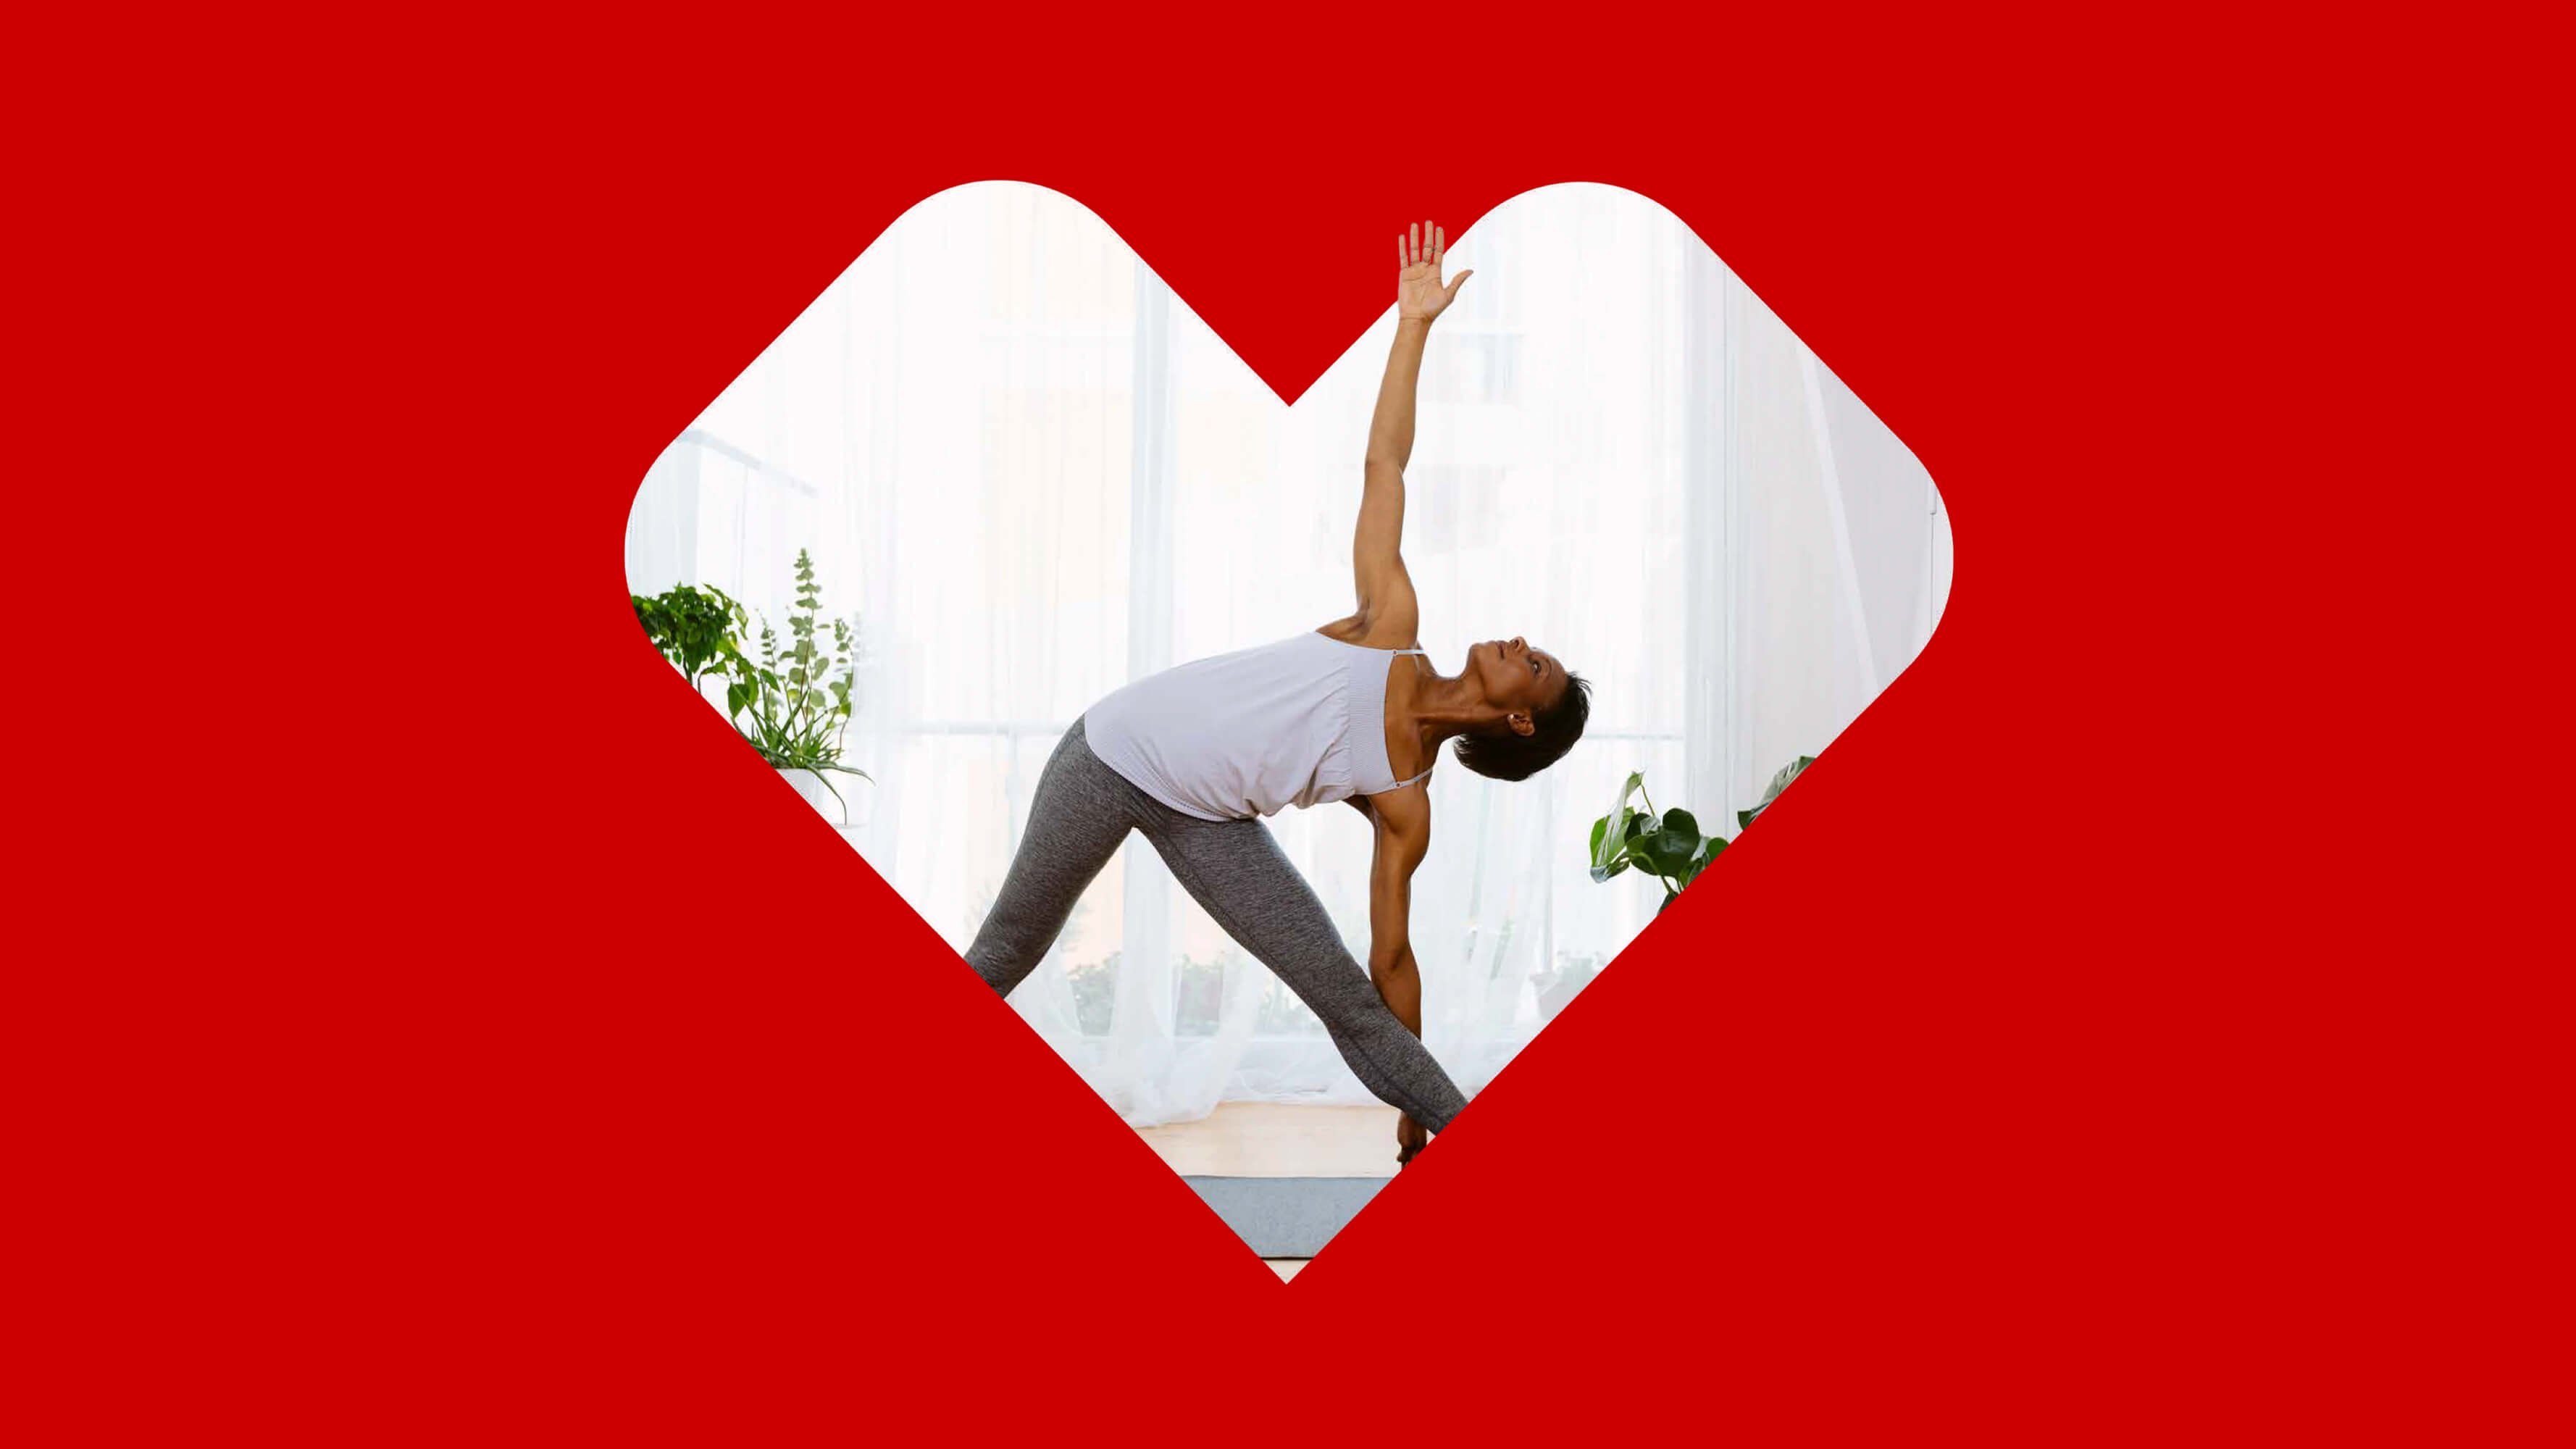 A woman in gray athletic clothes stretches and practices yoga poses in a very light and bright room. The photo is set inside of a CVS Health® heart on a red background.